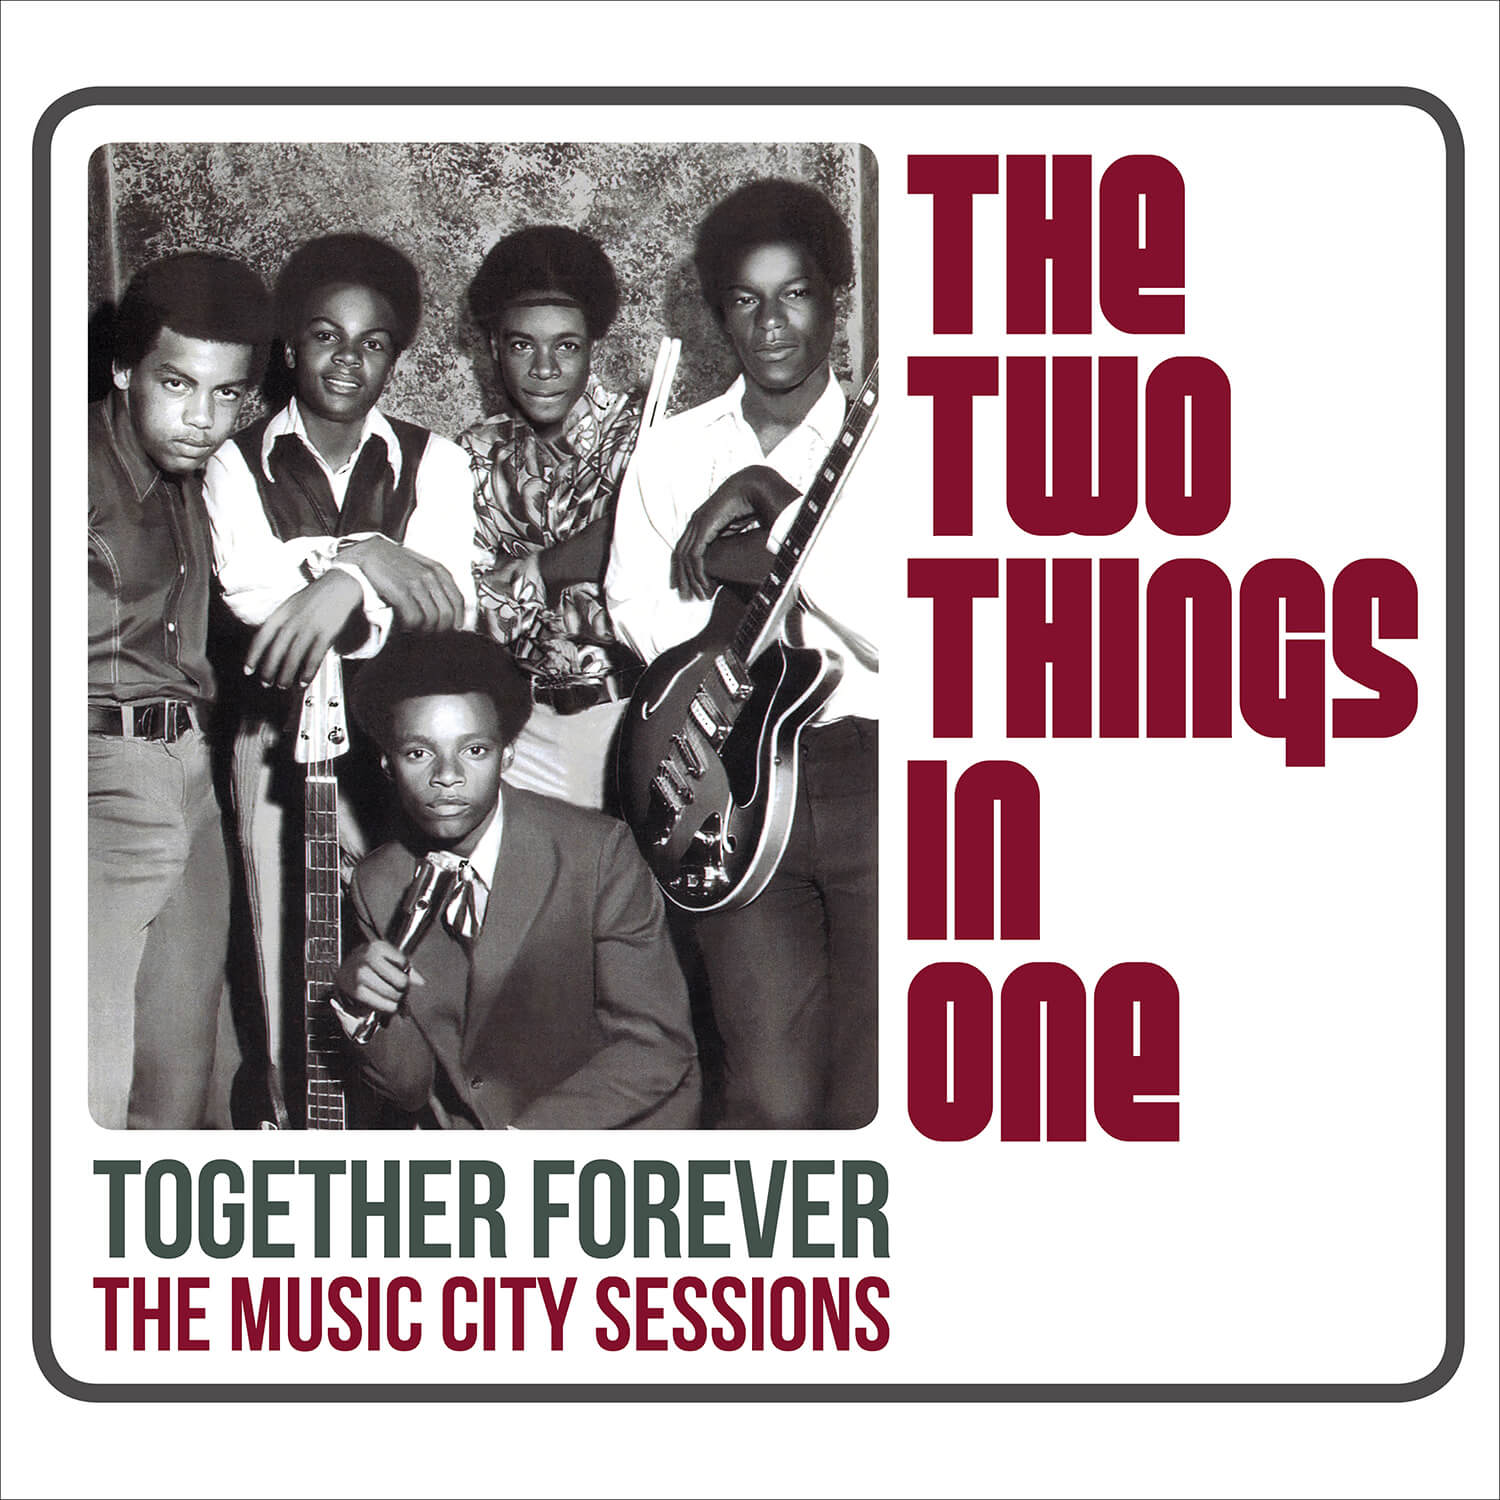 Together Forever: The Music City Sessions